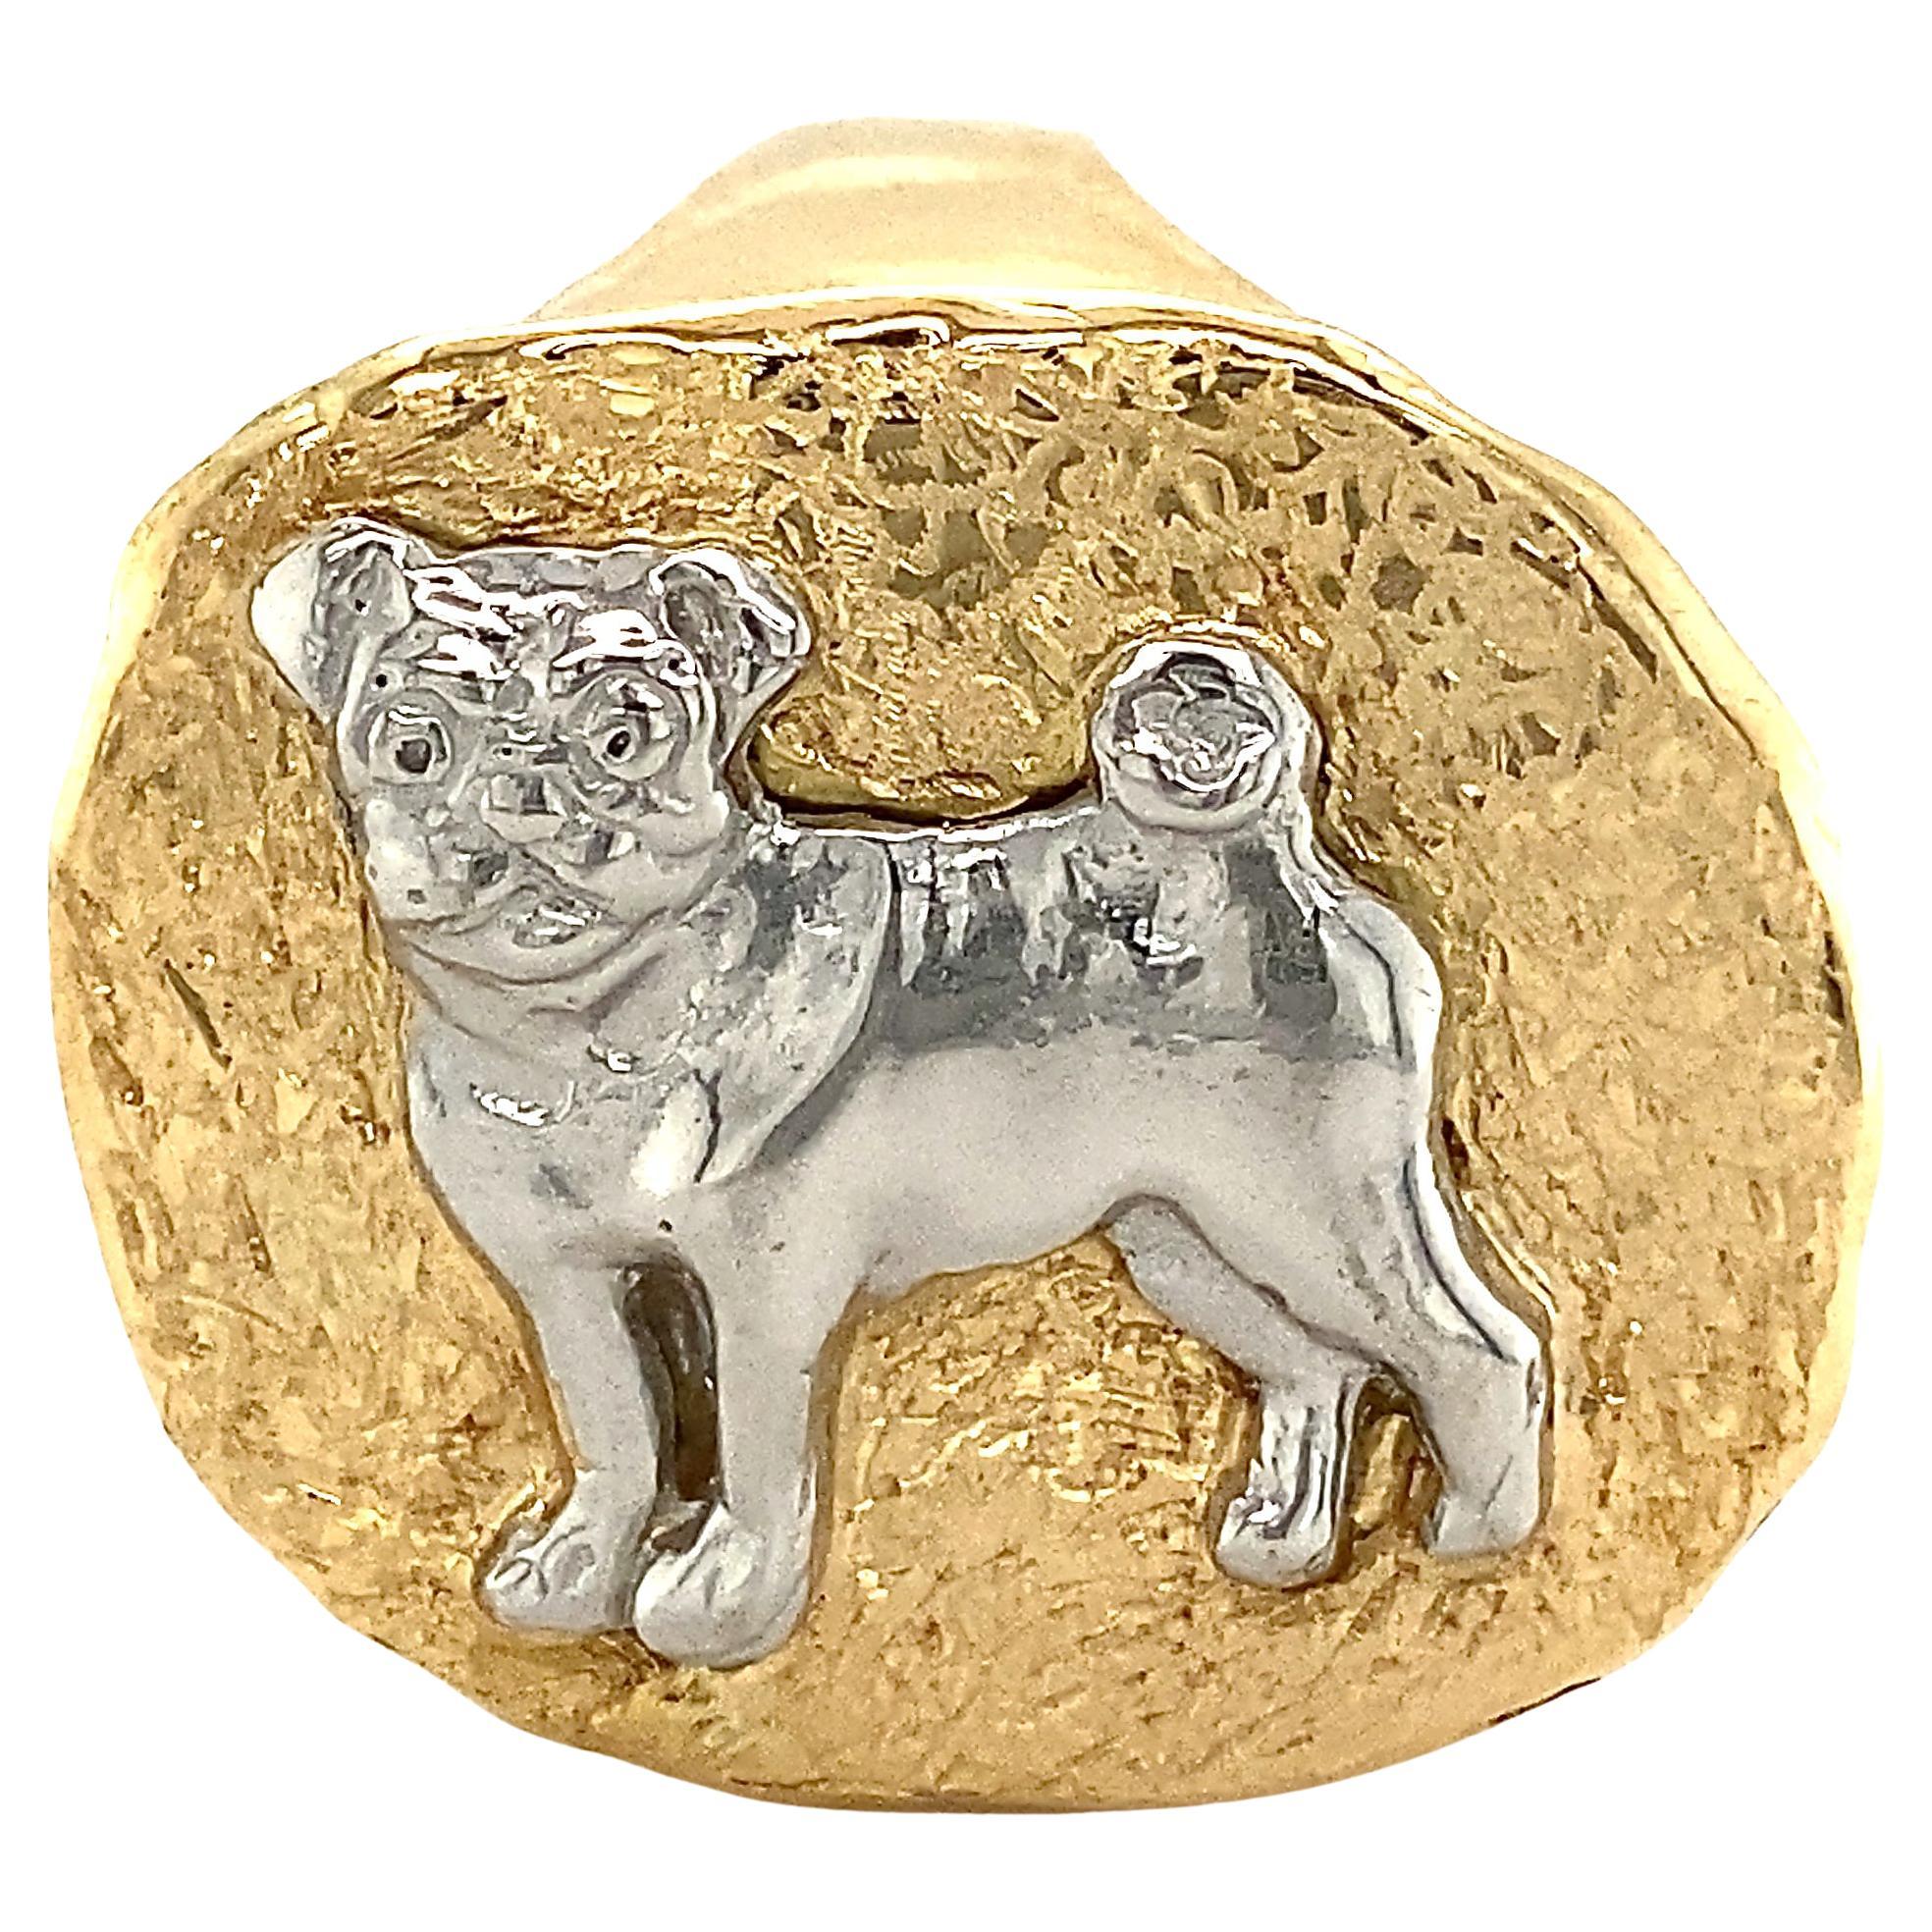 "Steve the Pug" Signet Ring in 18 Karat Yellow Gold and Platinum